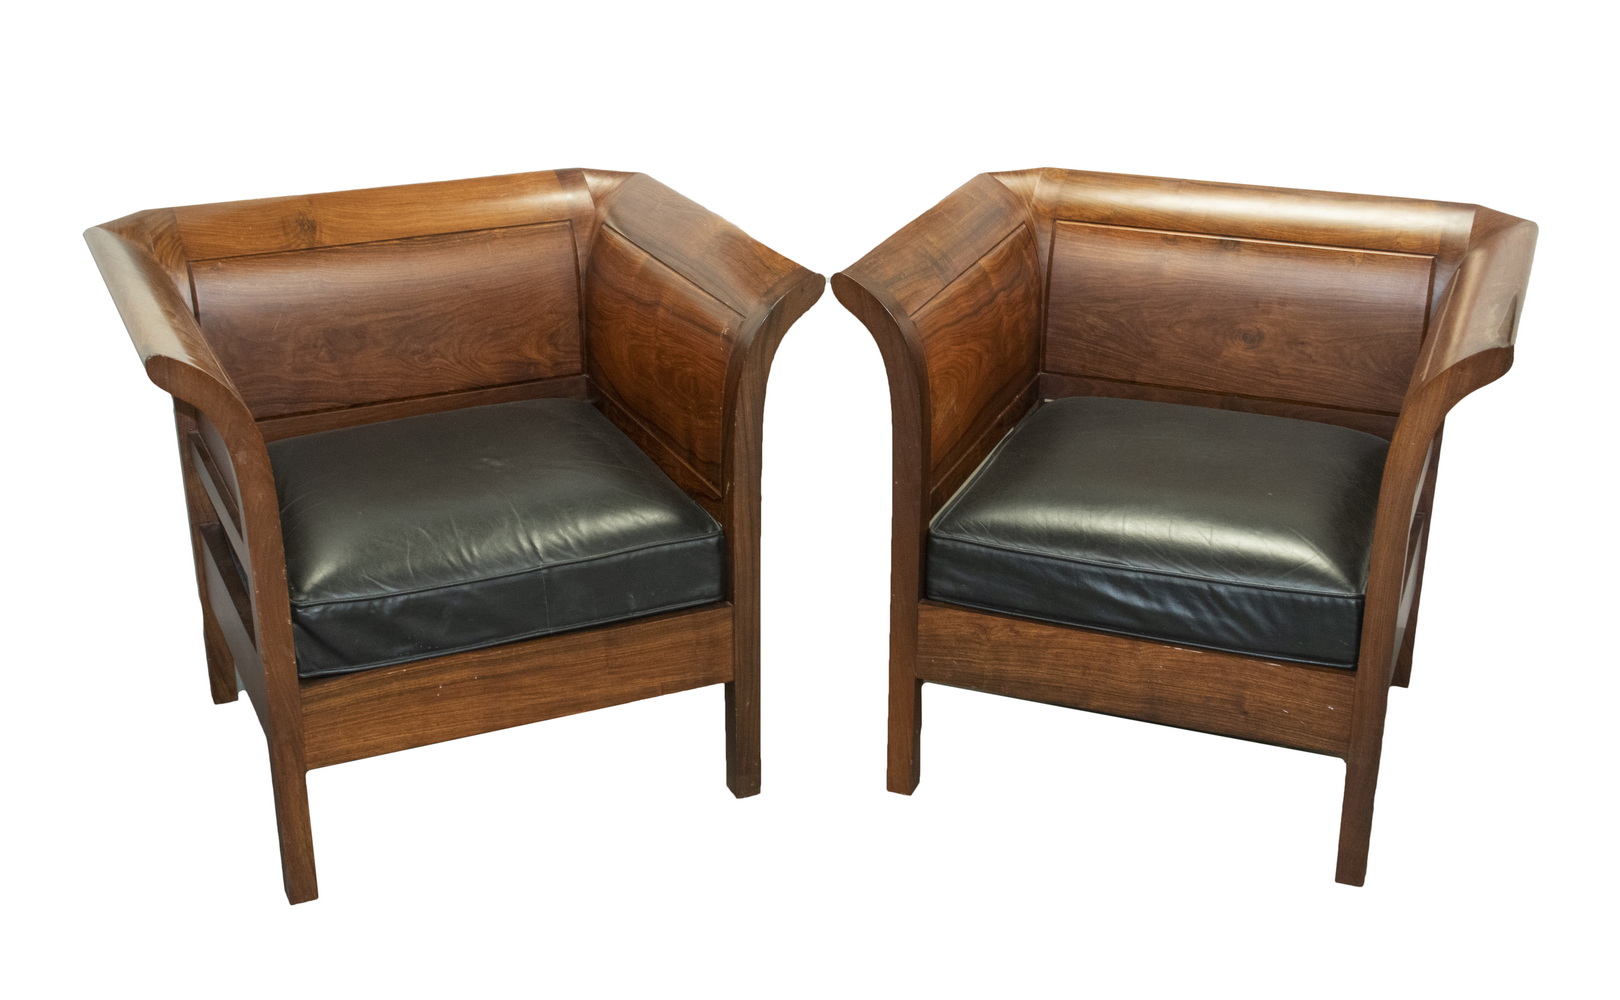 PR ROSEWOOD LEATHER CHAIRS Pair 2b1efc